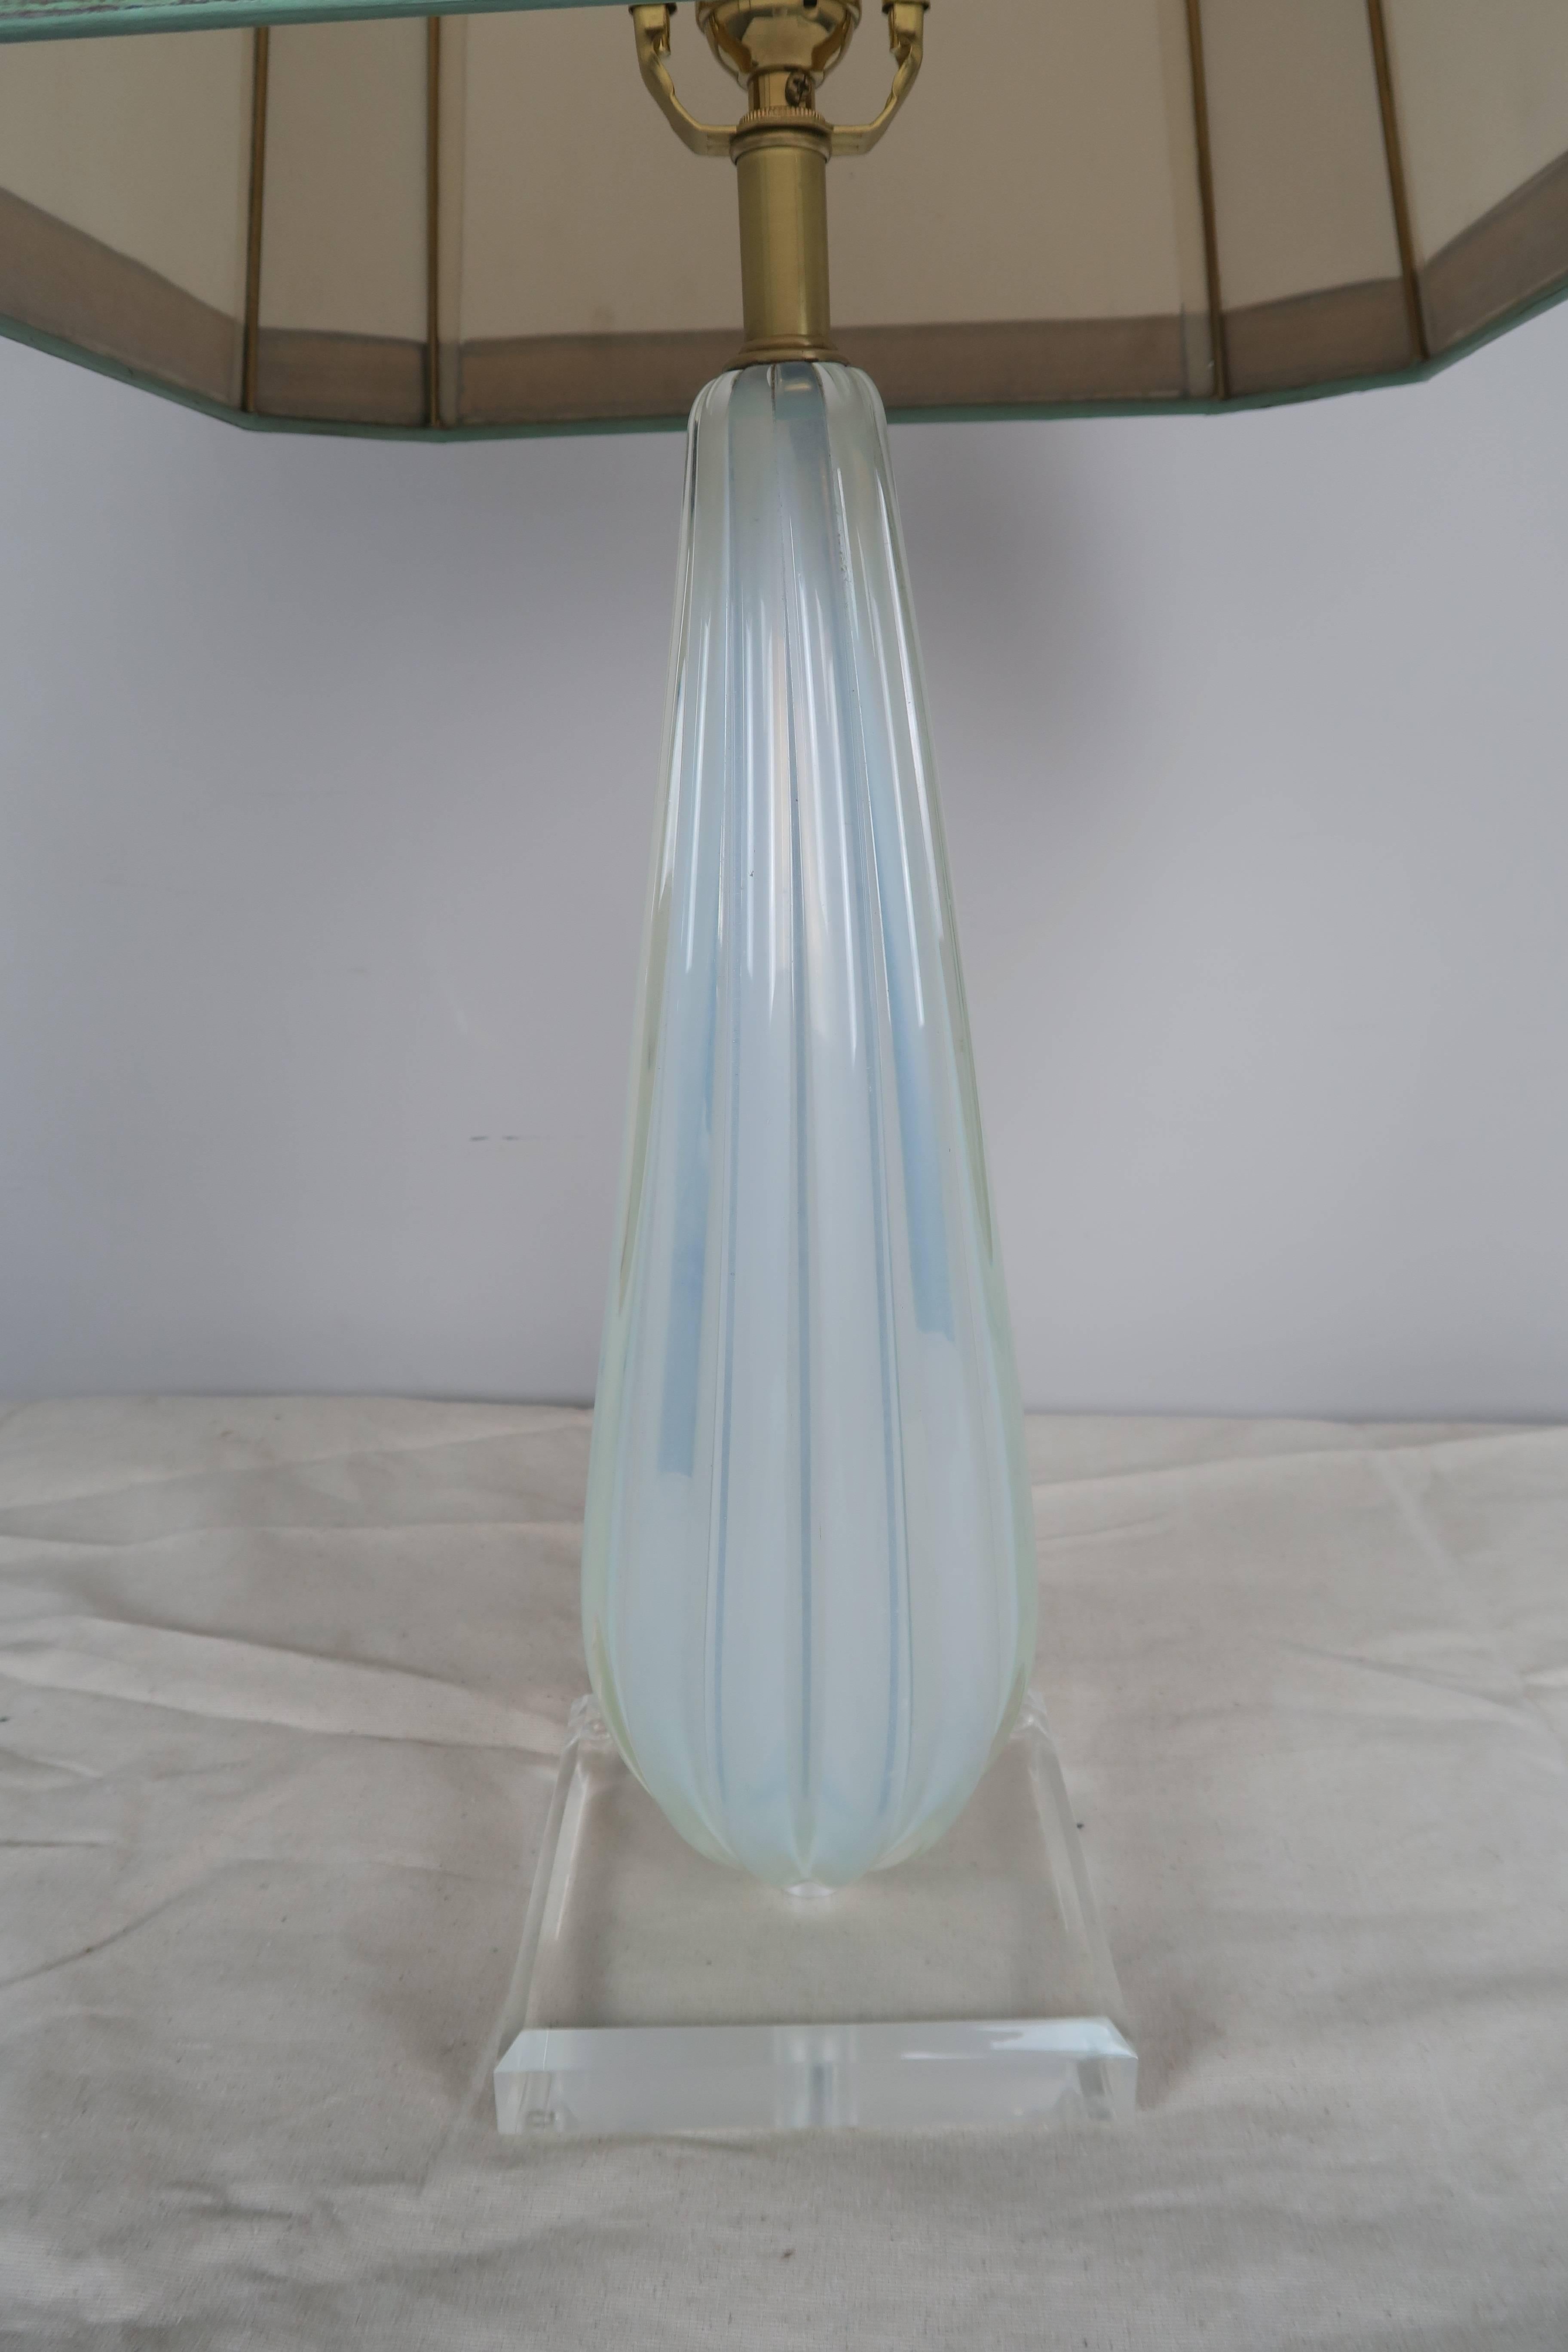 Italian Murano handblown glass lamp in a soft aqua blue coloration. The lamp sits on a square Lucite base and is crowned with a hand-painted parchment shade with gold leaf detailing.